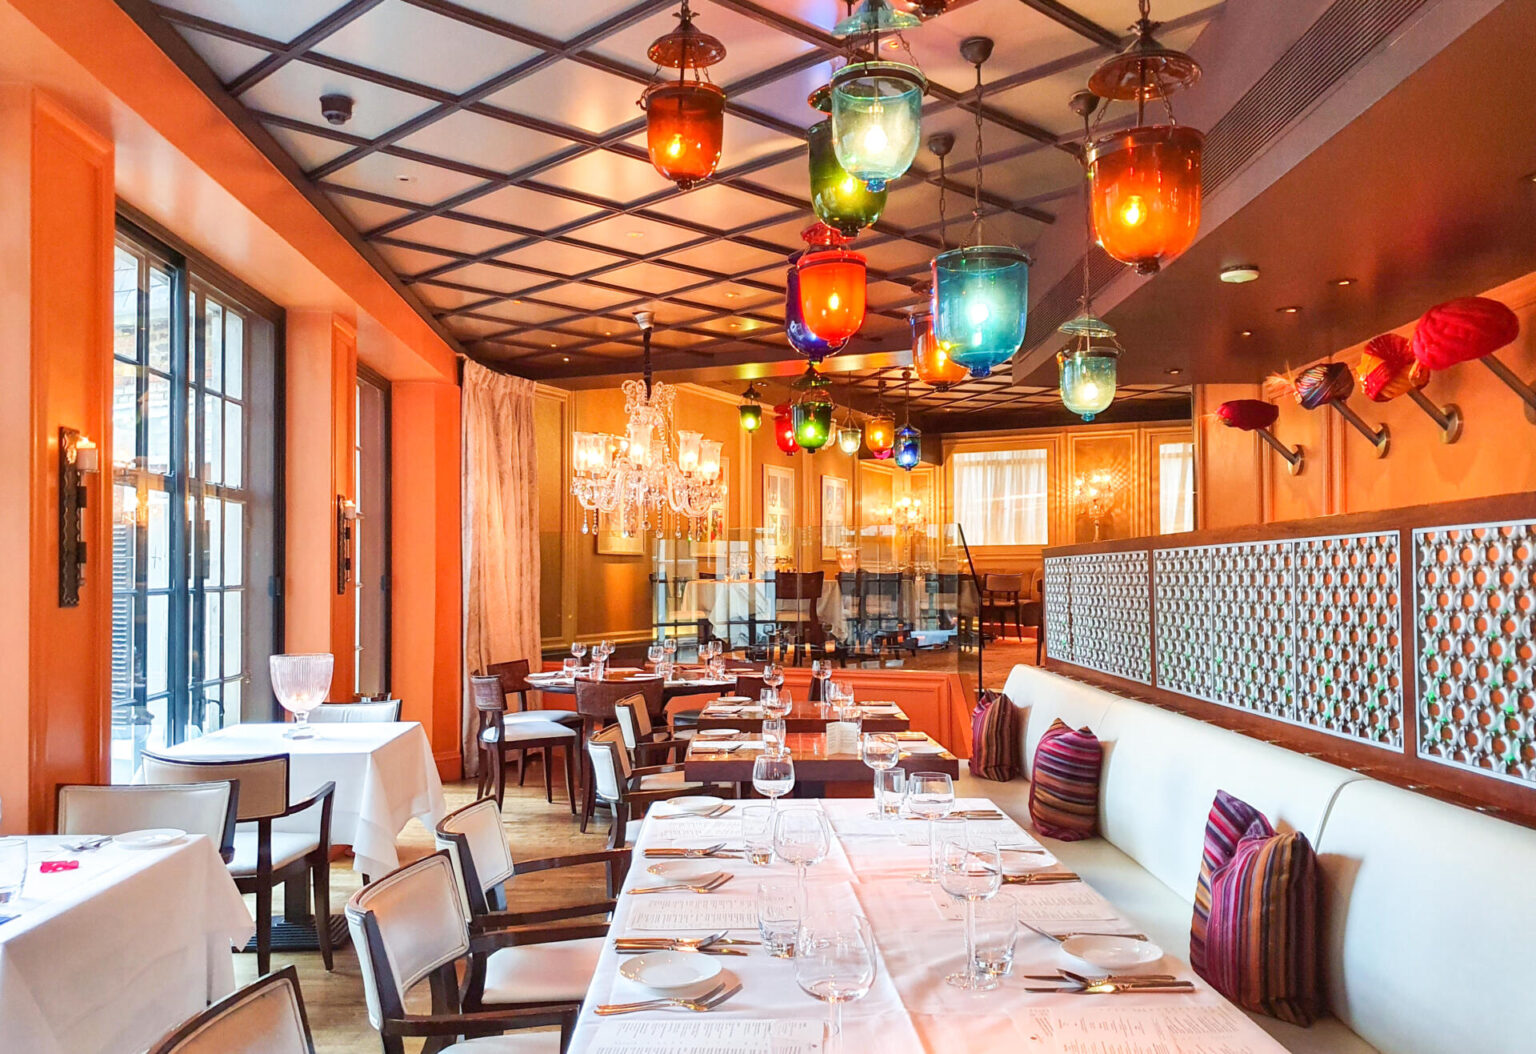 Veeraswamy Restaurant Review: Michelin Starred Dining at London’s